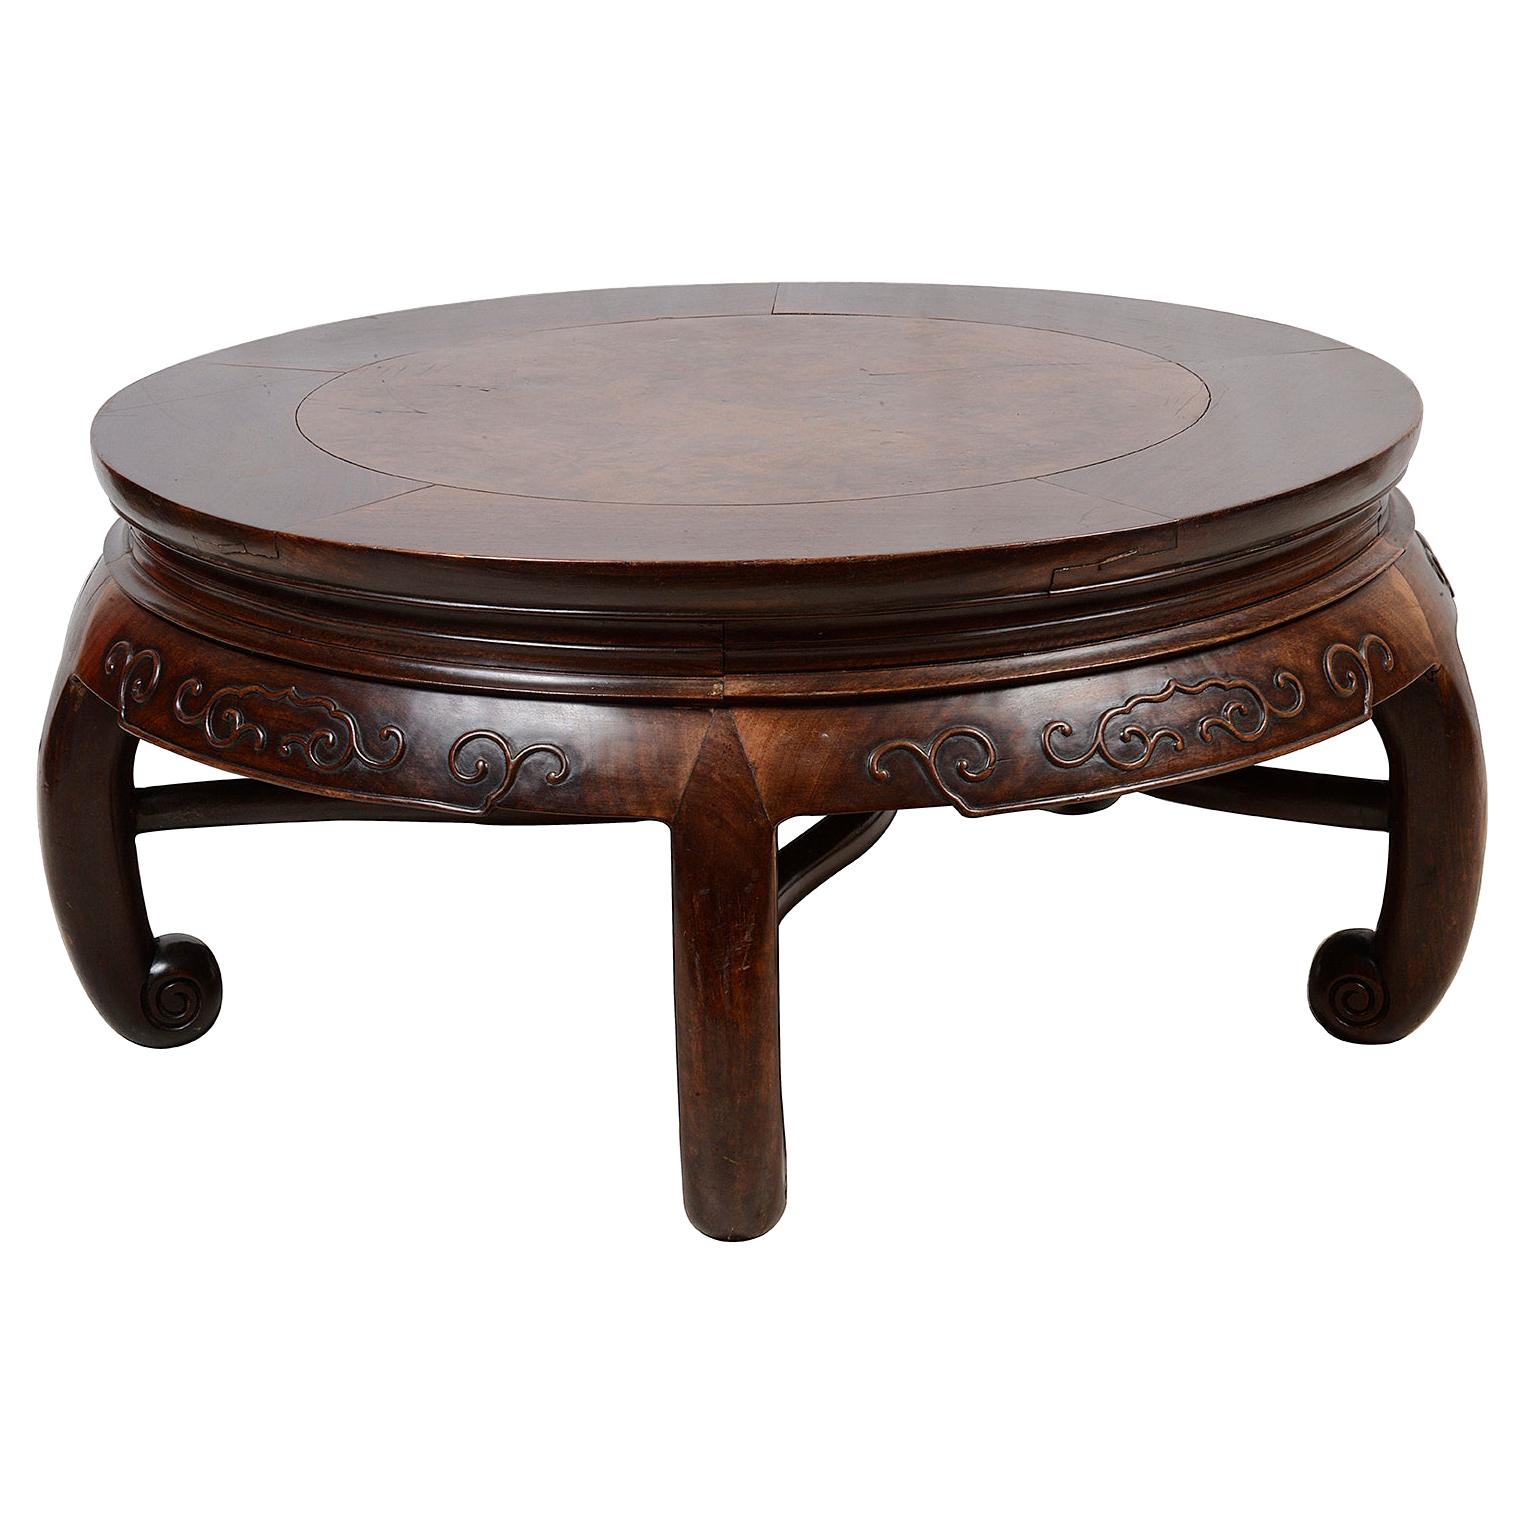 27x27x27-High Quality it ® Coffee Table Low Celestial Chinese Etnicart 